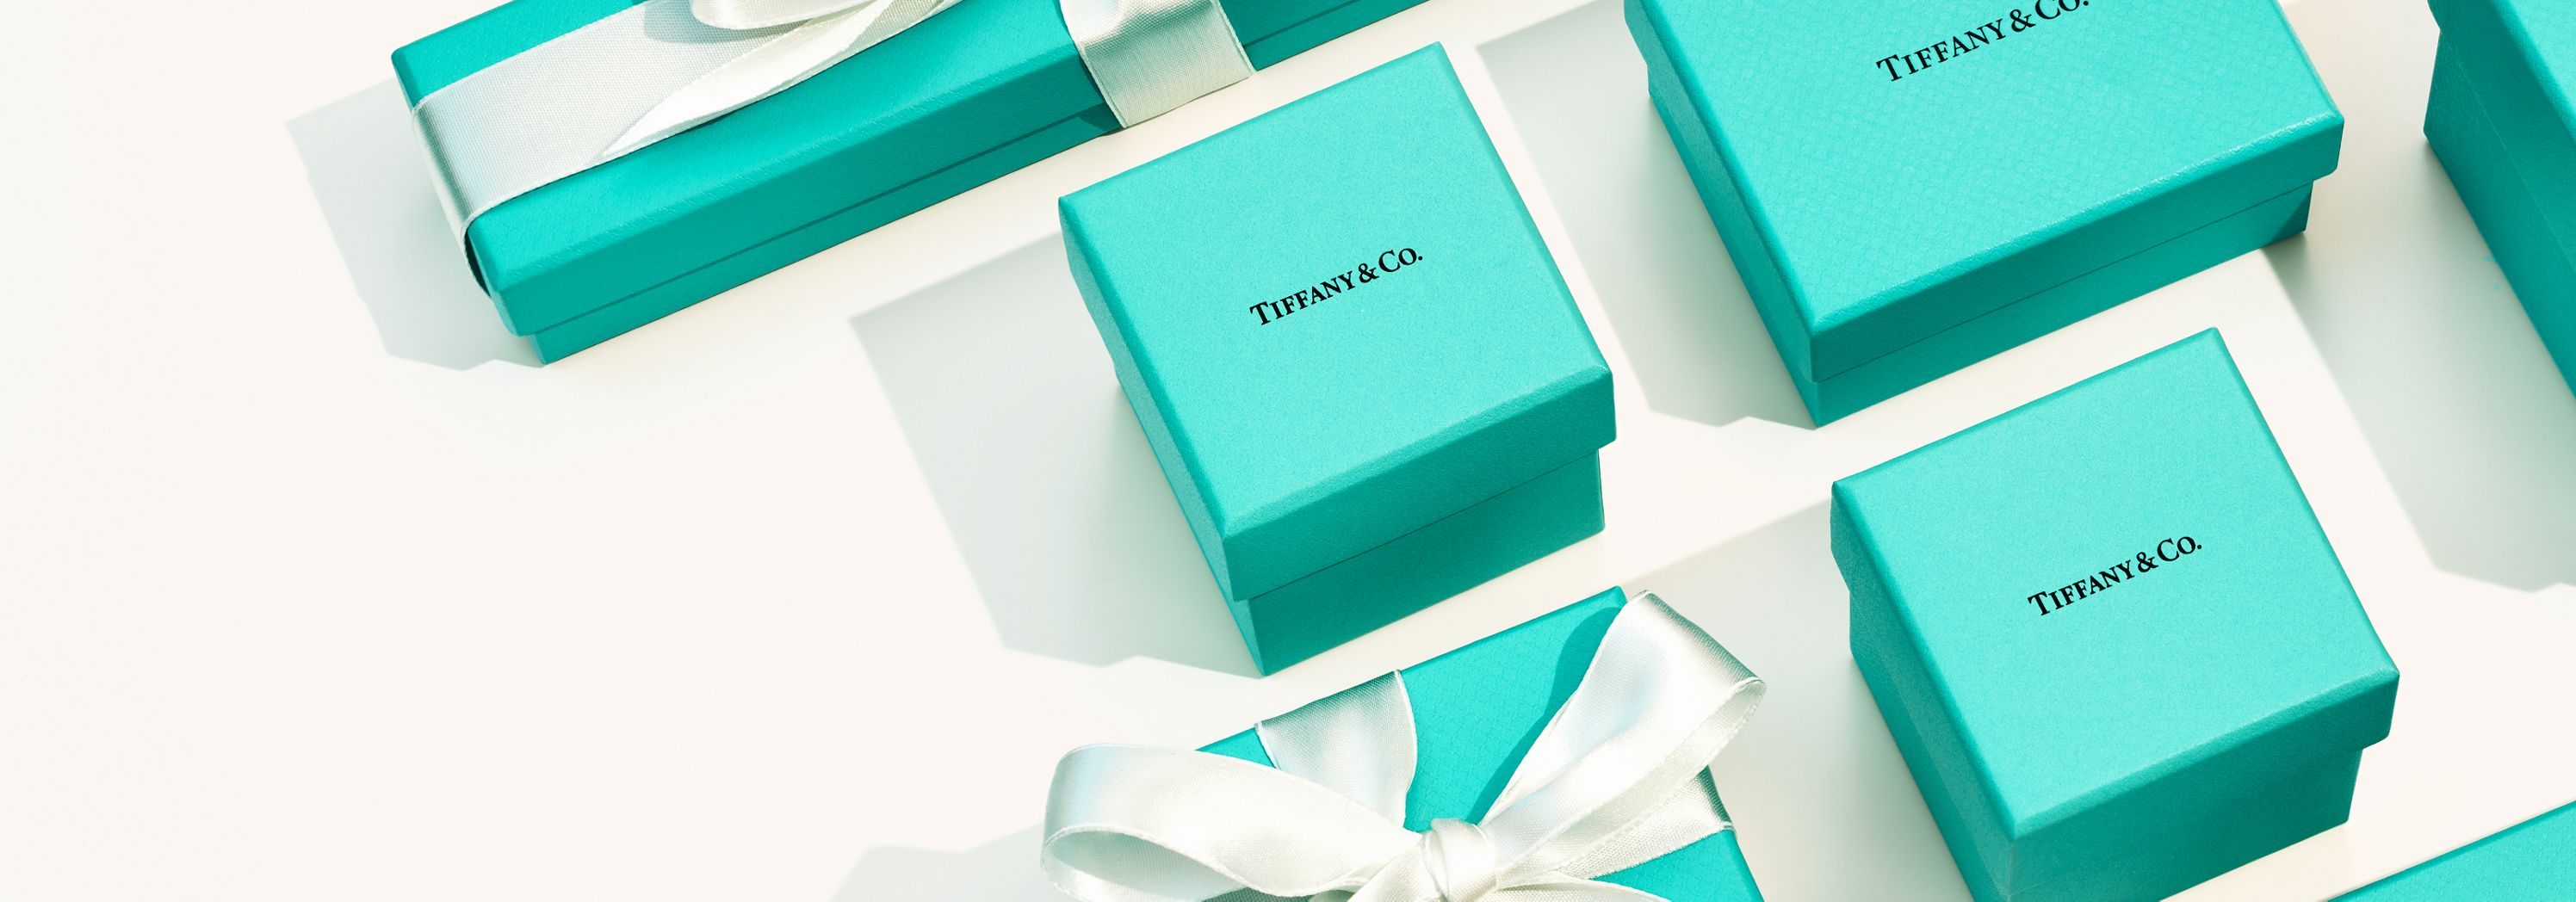 Luxury Gifts Present The Iconic Blue Box Tiffany Co